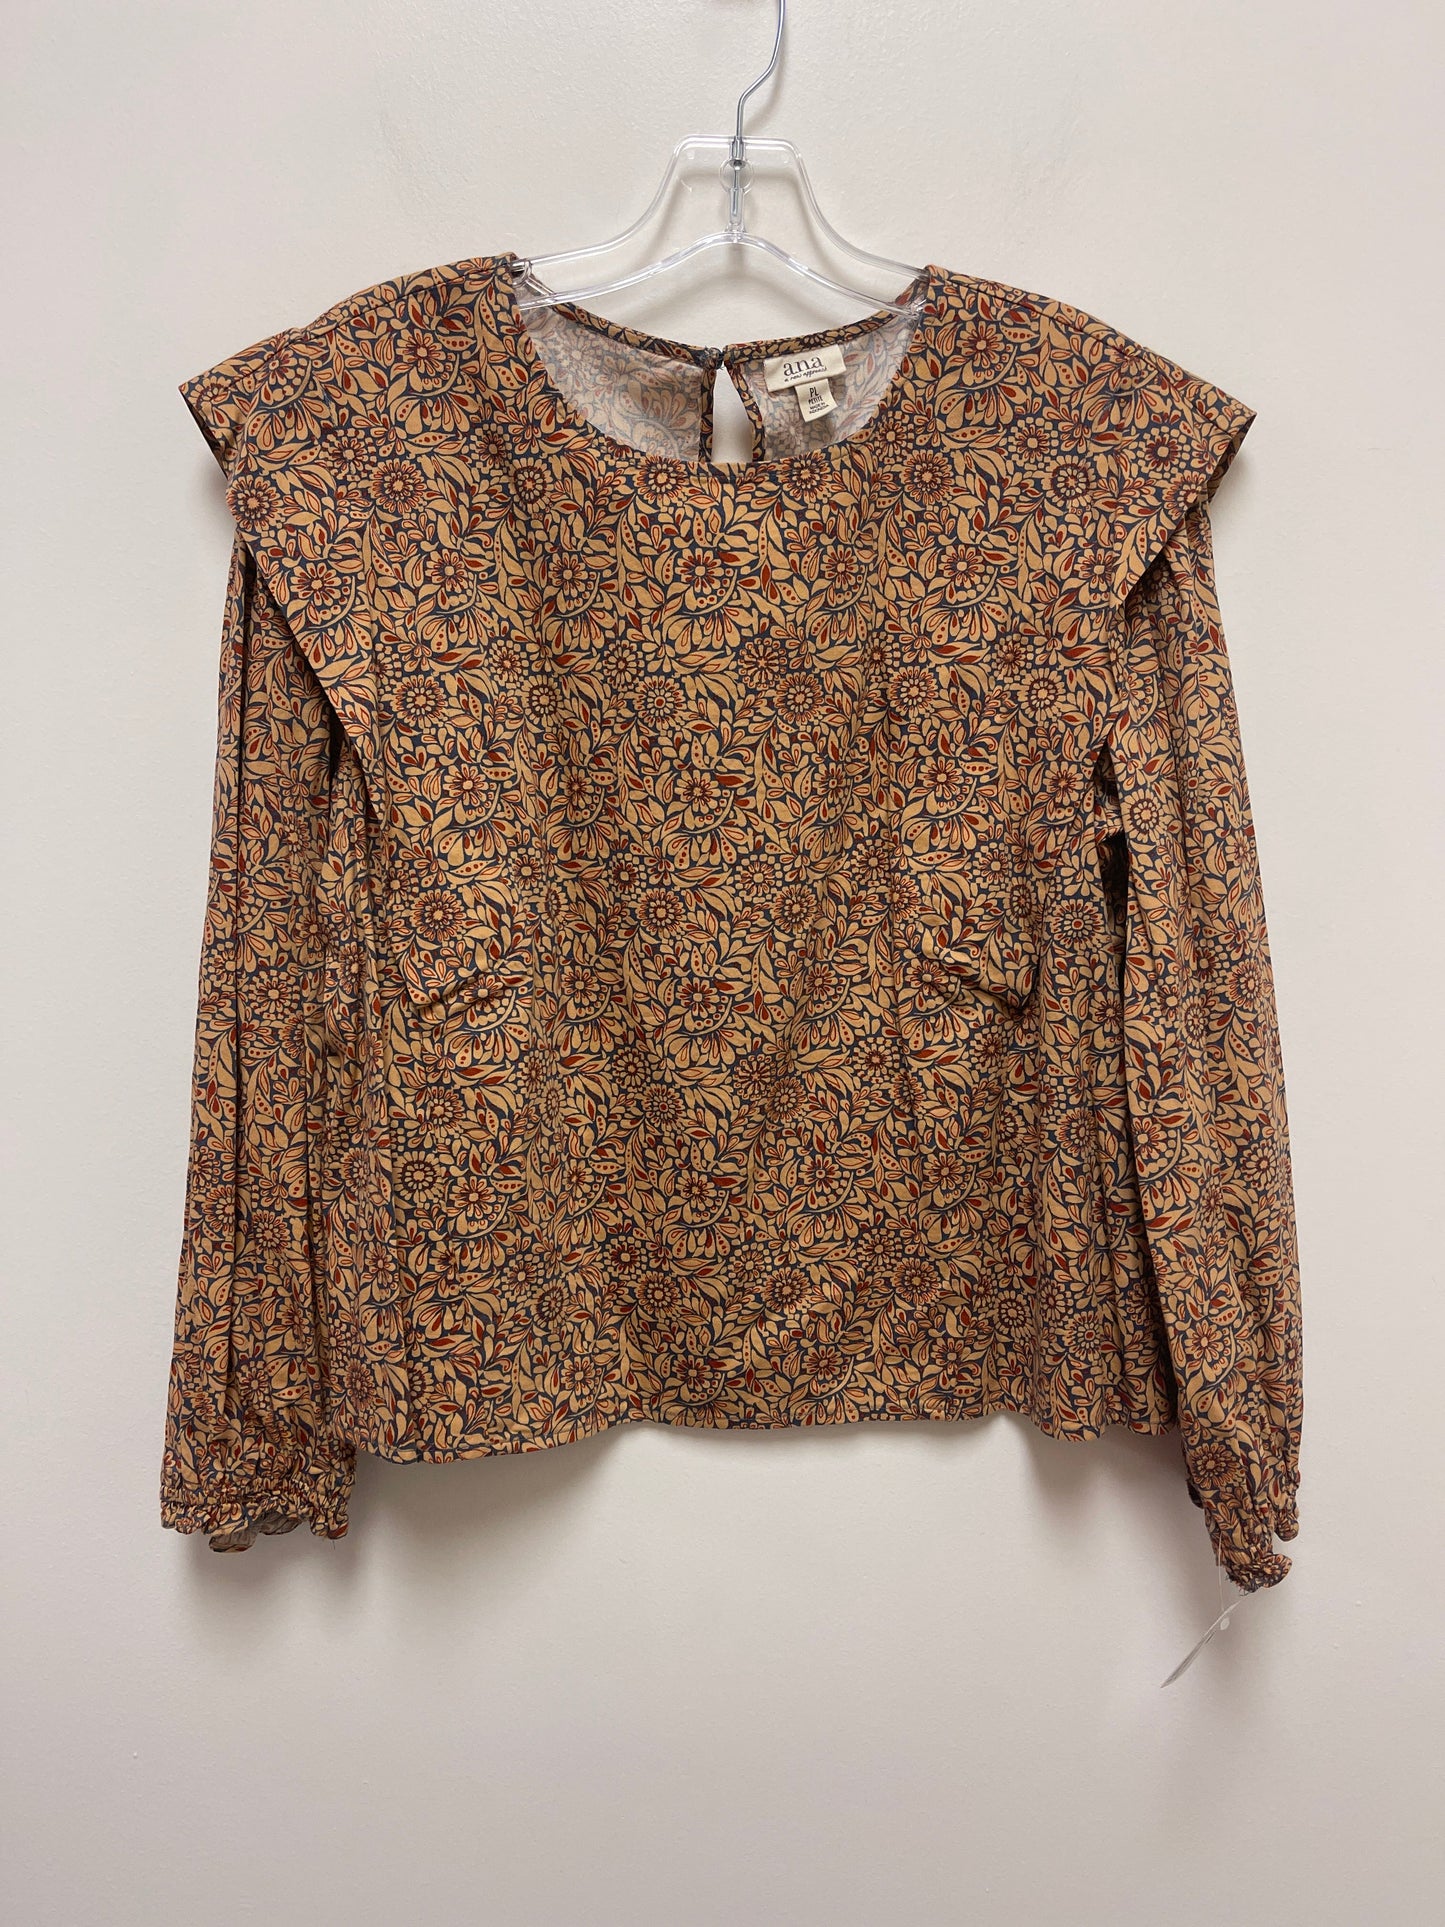 Top Long Sleeve By Ana  Size: L